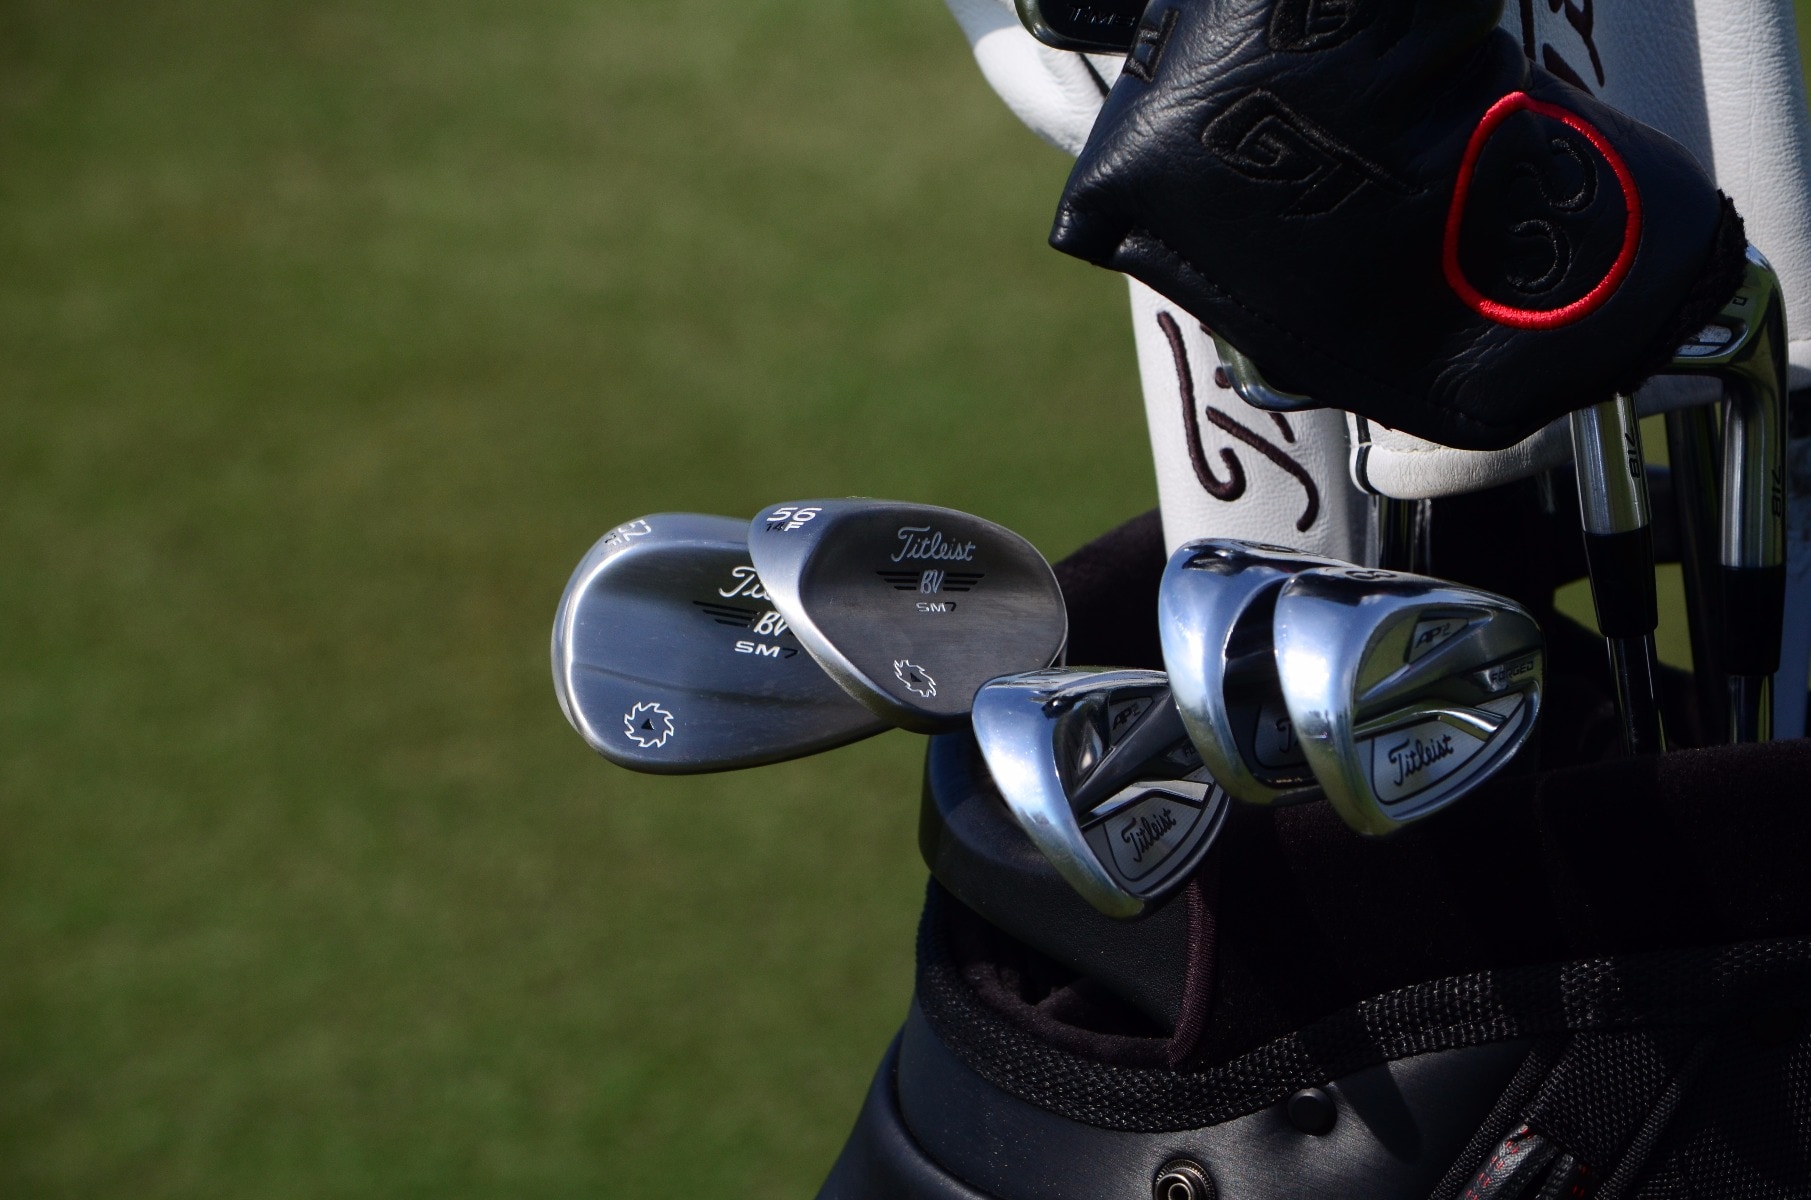 The perfect complements to these 718 AP2 irons -...